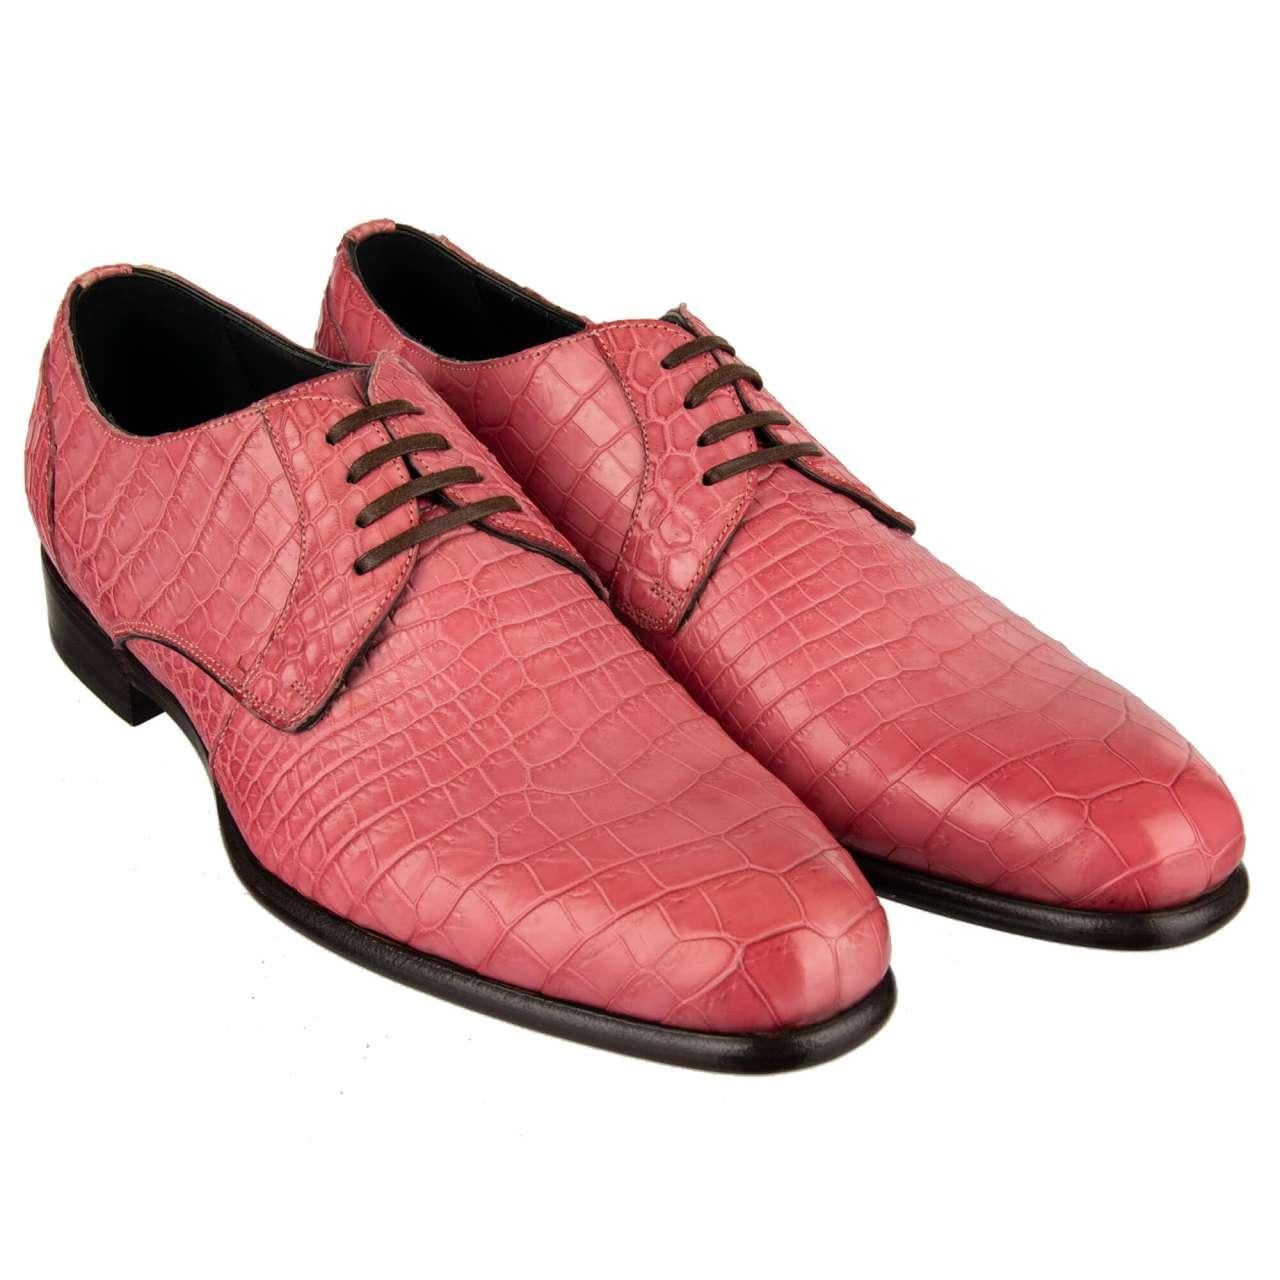 Dolce & Gabbana Crocodile Leather Derby Shoes SIENA Pink EUR 40 For Sale 2